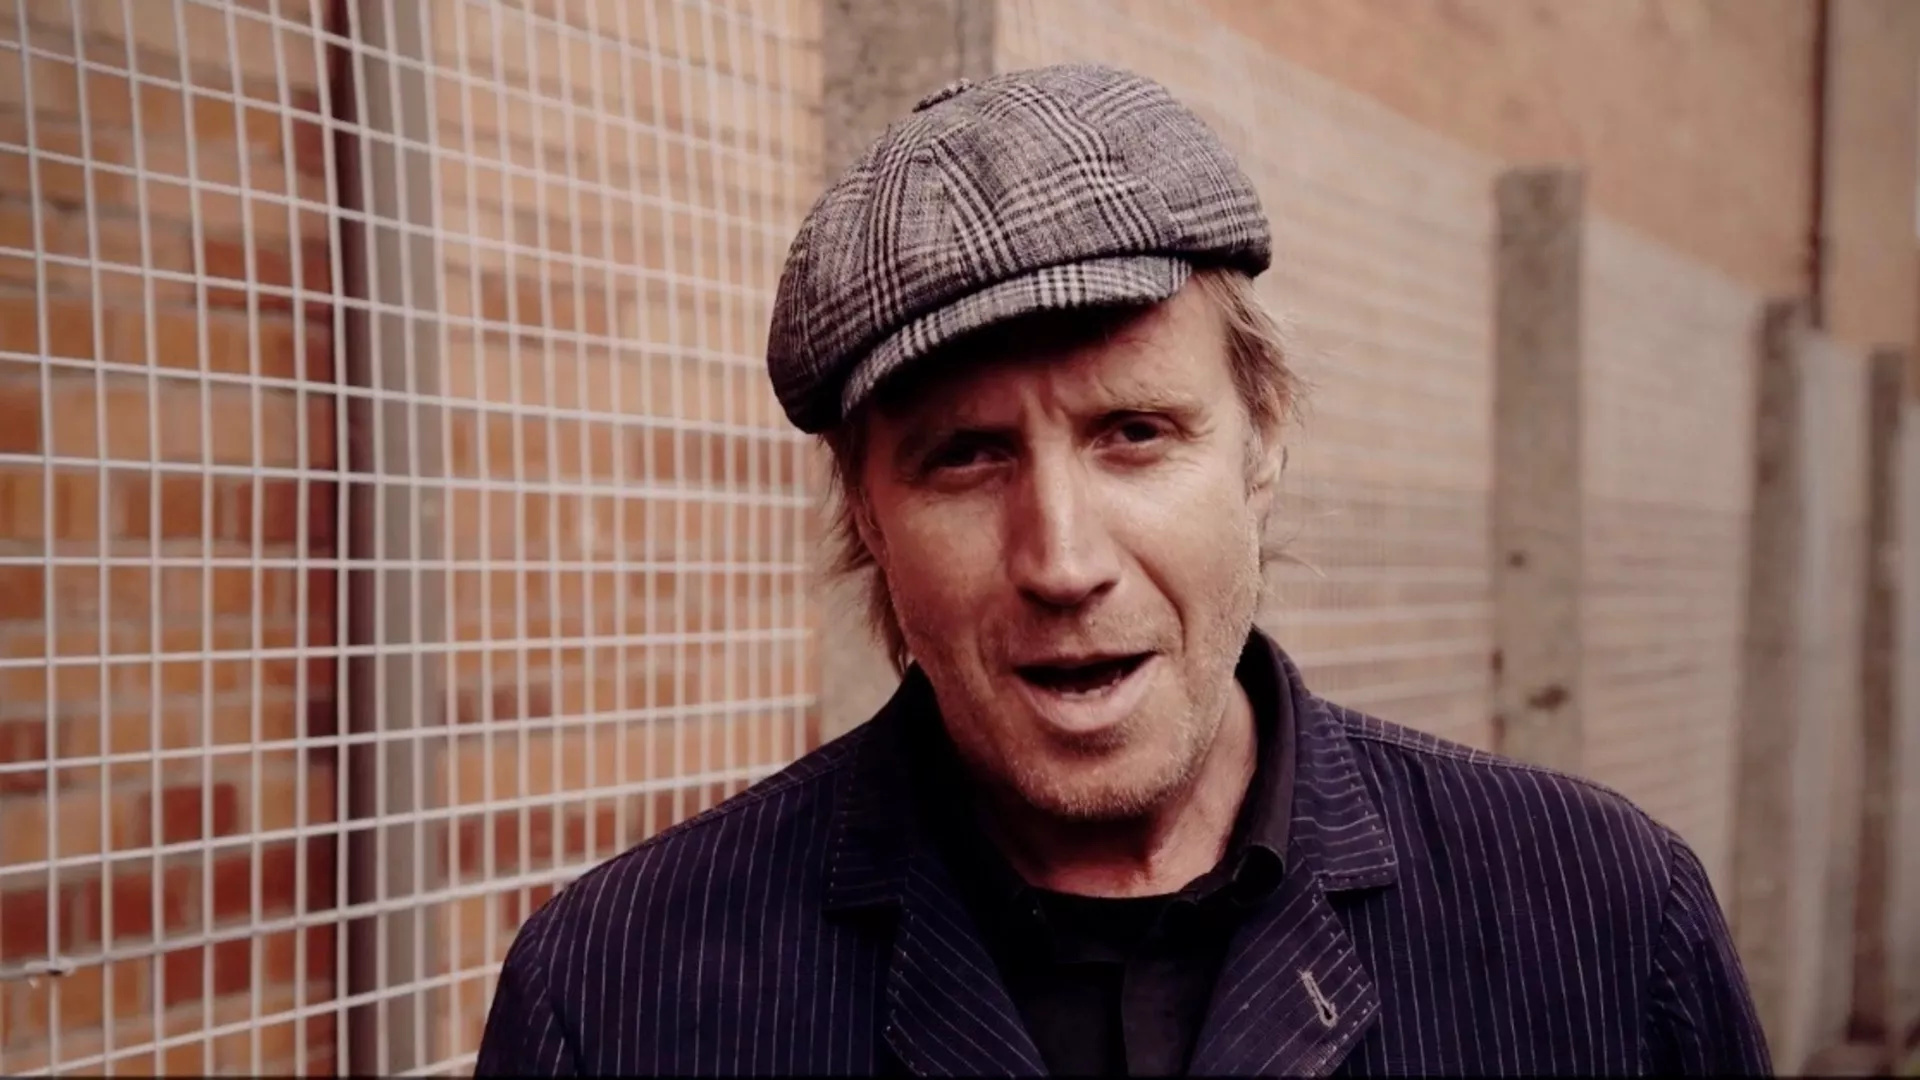 Rhys Ifans, Tackling homelessness, Social issue, Advocacy, 1920x1080 Full HD Desktop